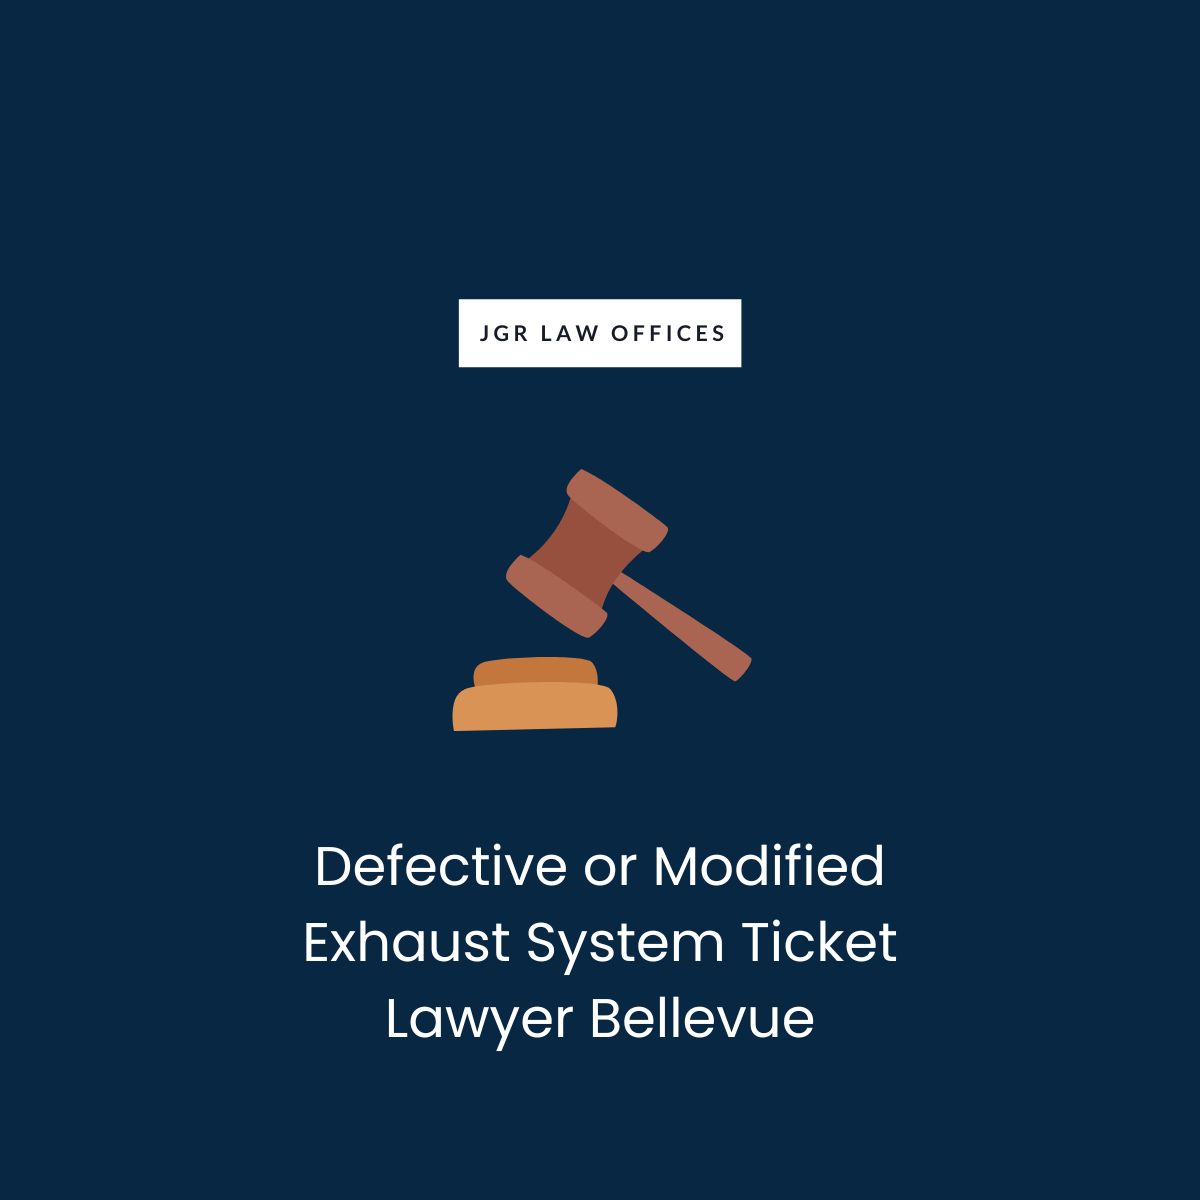 Defective or Modified Exhaust System Ticket Attorney Bellevue